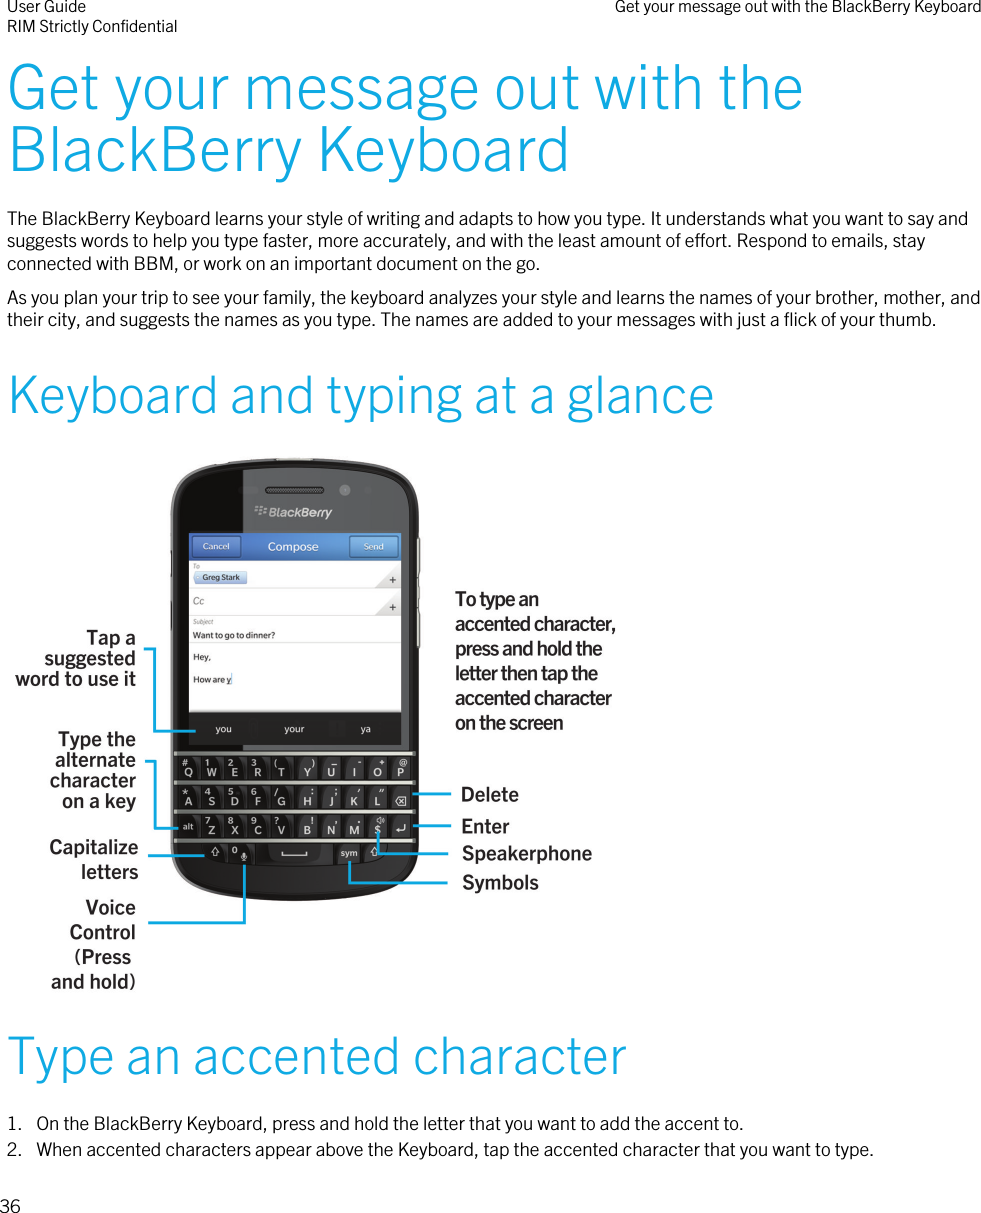 Get your message out with theBlackBerry KeyboardThe BlackBerry Keyboard learns your style of writing and adapts to how you type. It understands what you want to say andsuggests words to help you type faster, more accurately, and with the least amount of effort. Respond to emails, stayconnected with BBM, or work on an important document on the go.As you plan your trip to see your family, the keyboard analyzes your style and learns the names of your brother, mother, andtheir city, and suggests the names as you type. The names are added to your messages with just a flick of your thumb.Keyboard and typing at a glance Type an accented character1. On the BlackBerry Keyboard, press and hold the letter that you want to add the accent to.2. When accented characters appear above the Keyboard, tap the accented character that you want to type.User GuideRIM Strictly Confidential Get your message out with the BlackBerry Keyboard36